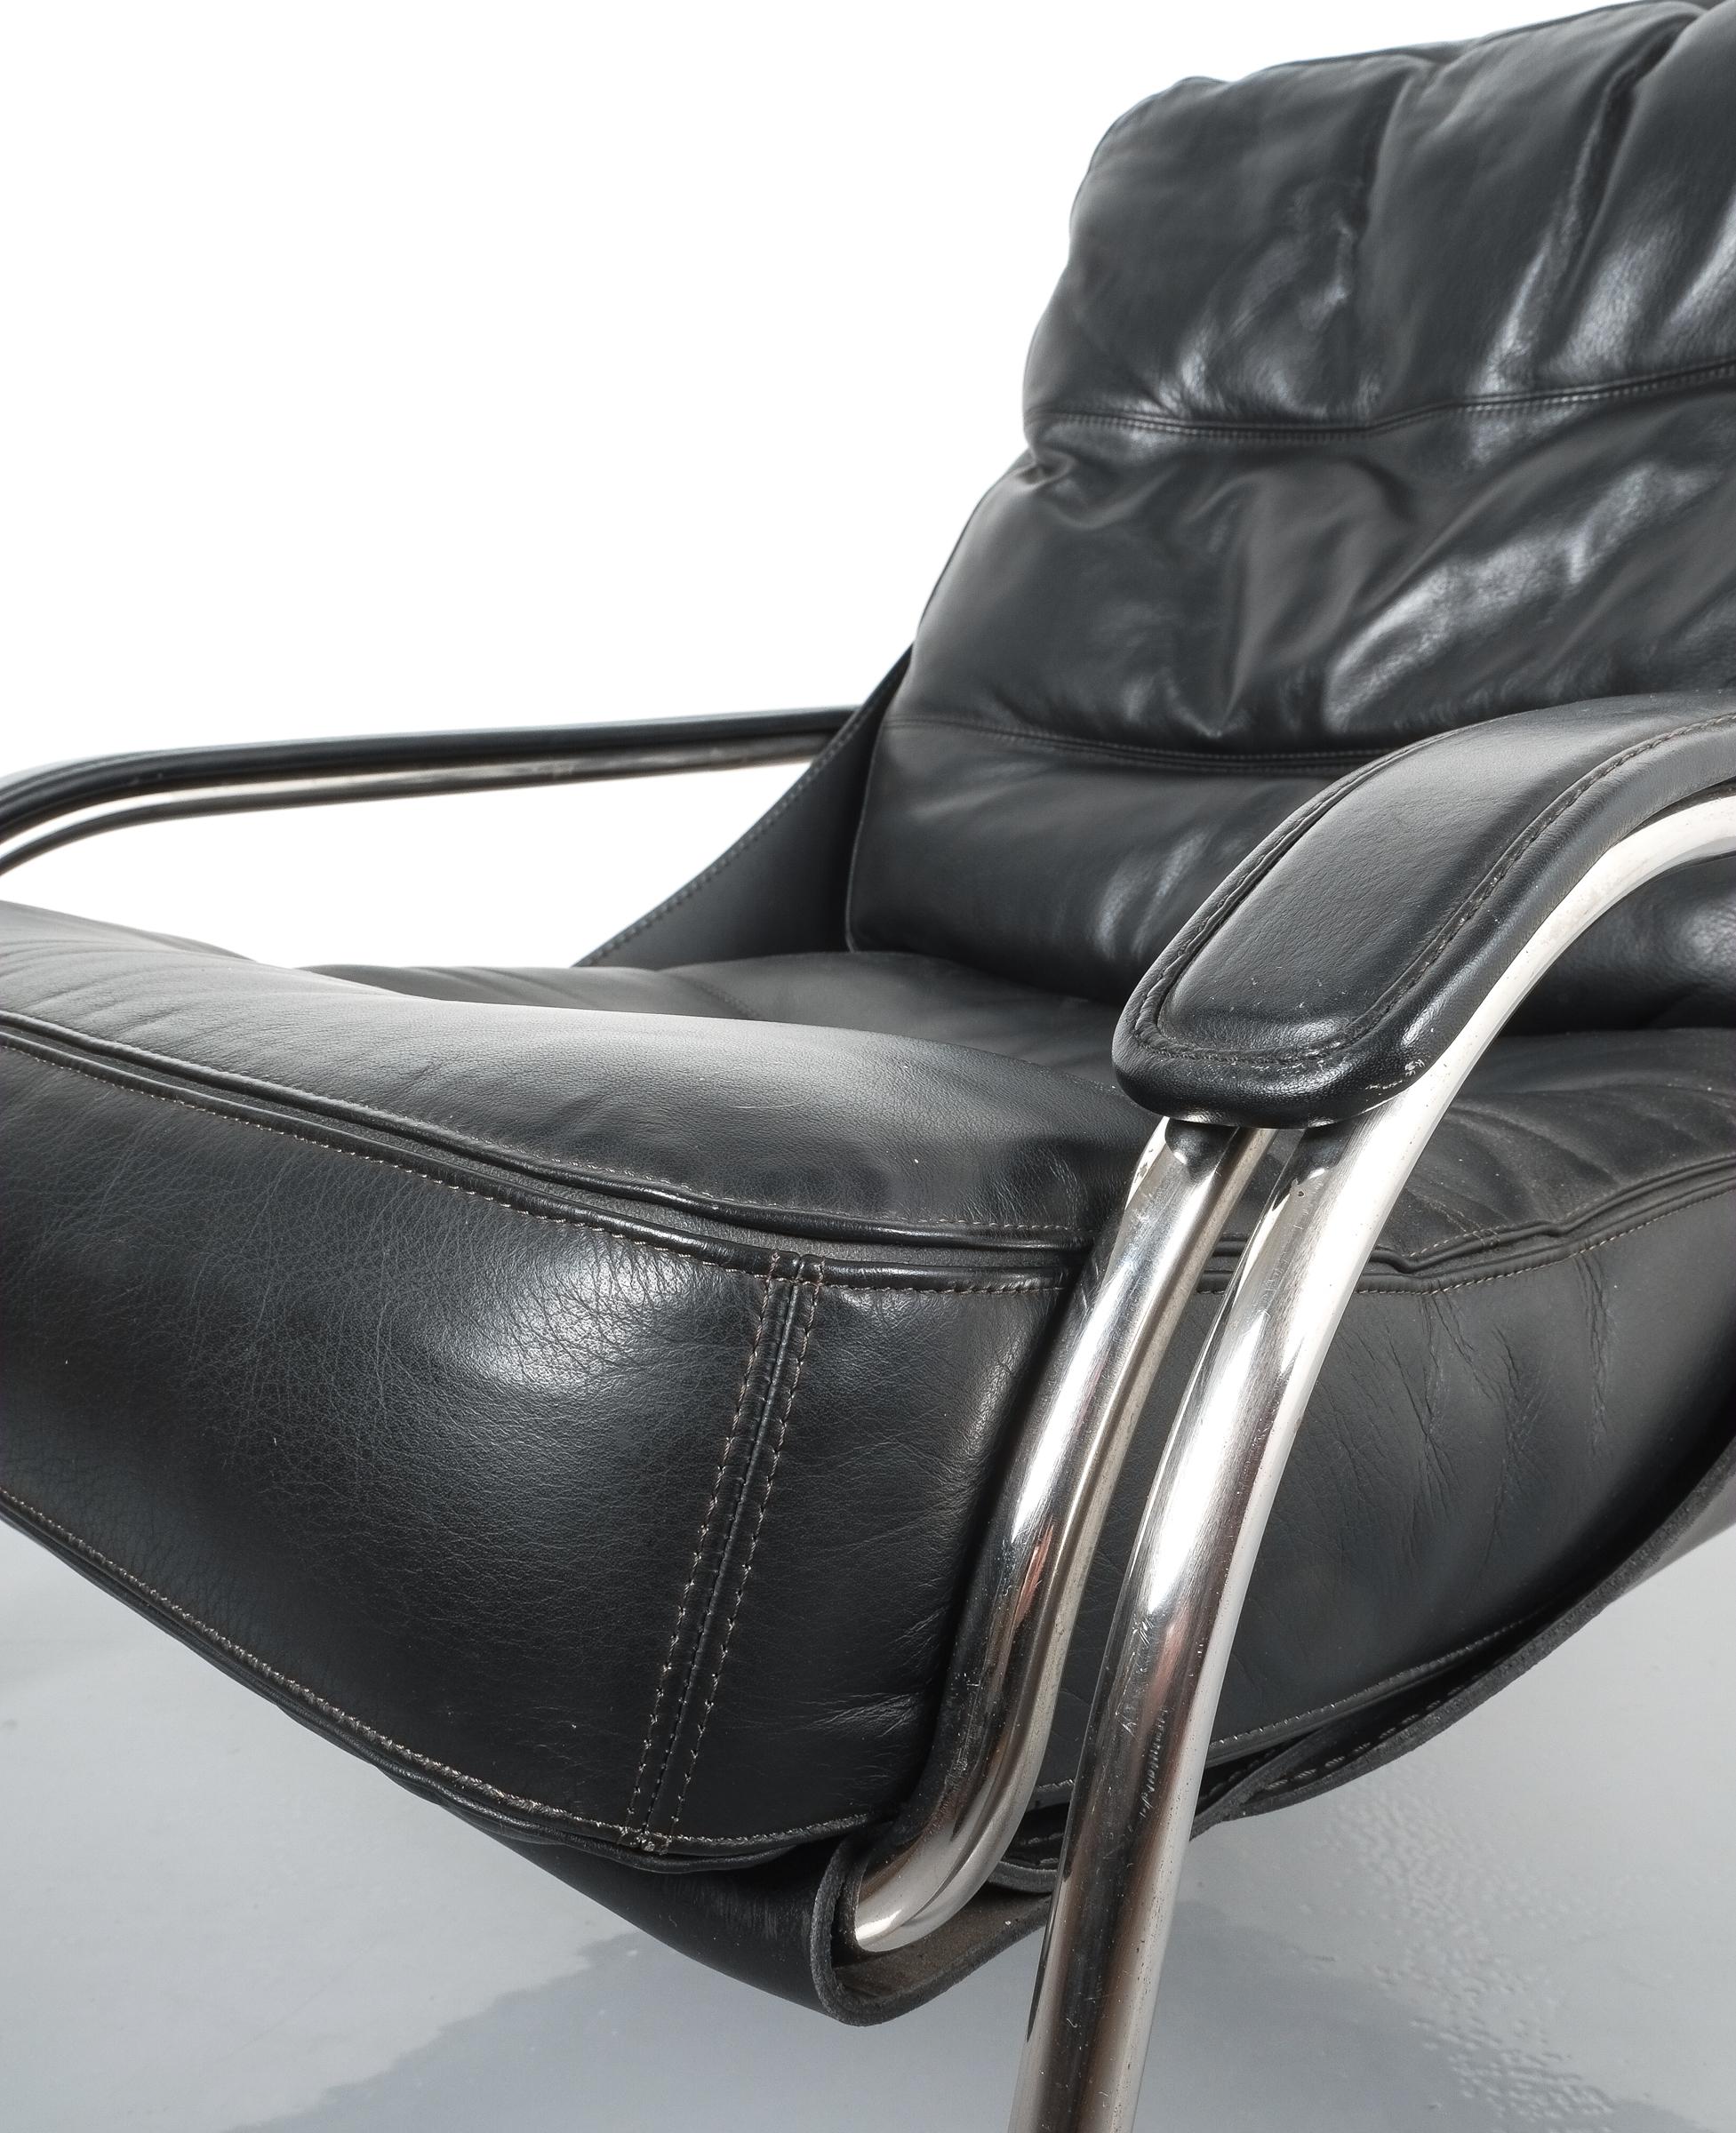 Marco Zanuso Maggiolina Sling Black Leather Chair by Zanotta, 1947 In Good Condition For Sale In Vienna, AT